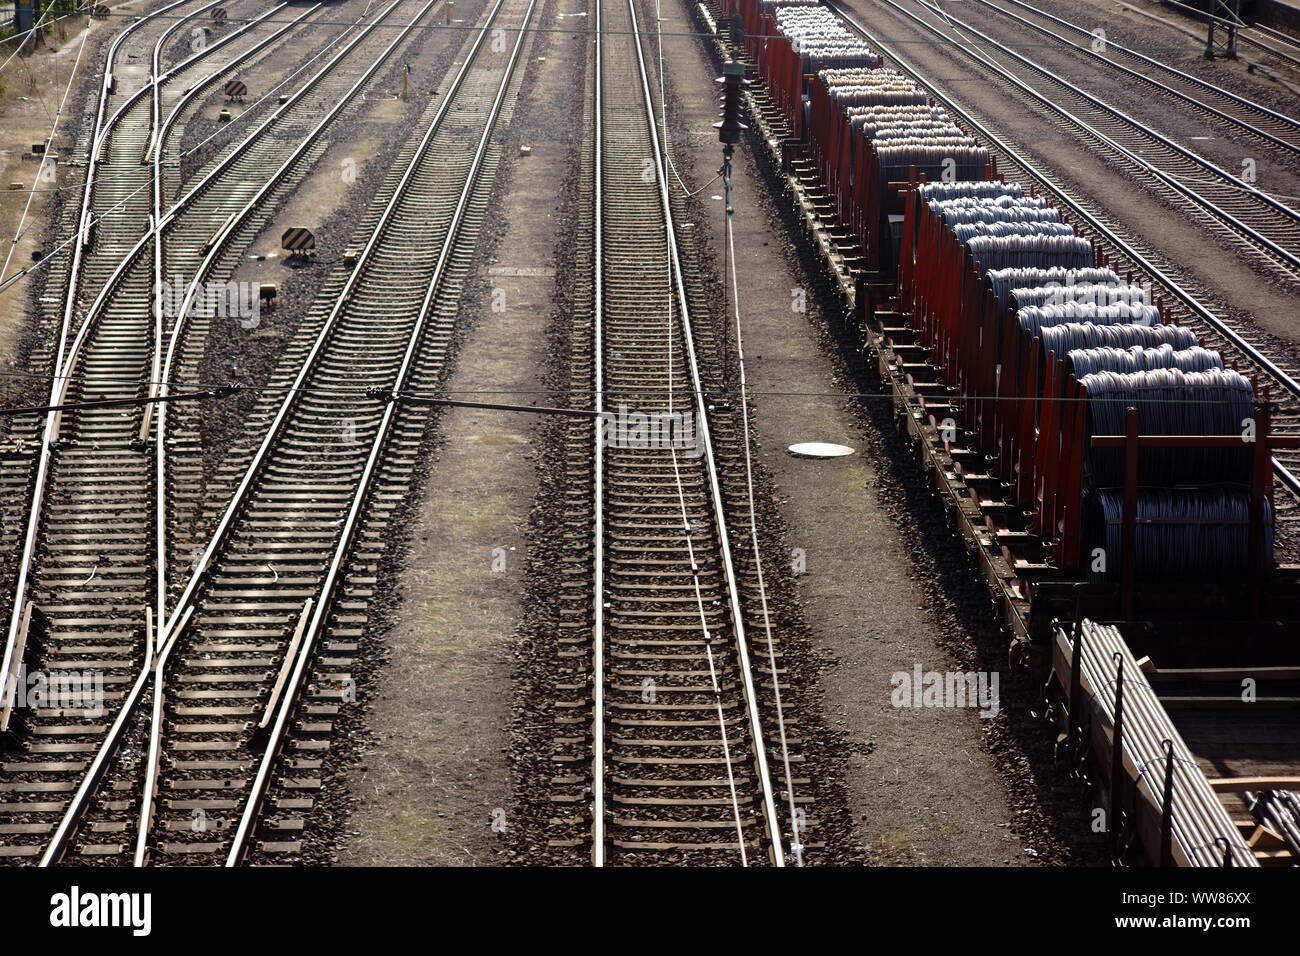 Rail carriages of a goods train on the railway system of a freight depot Stock Photo